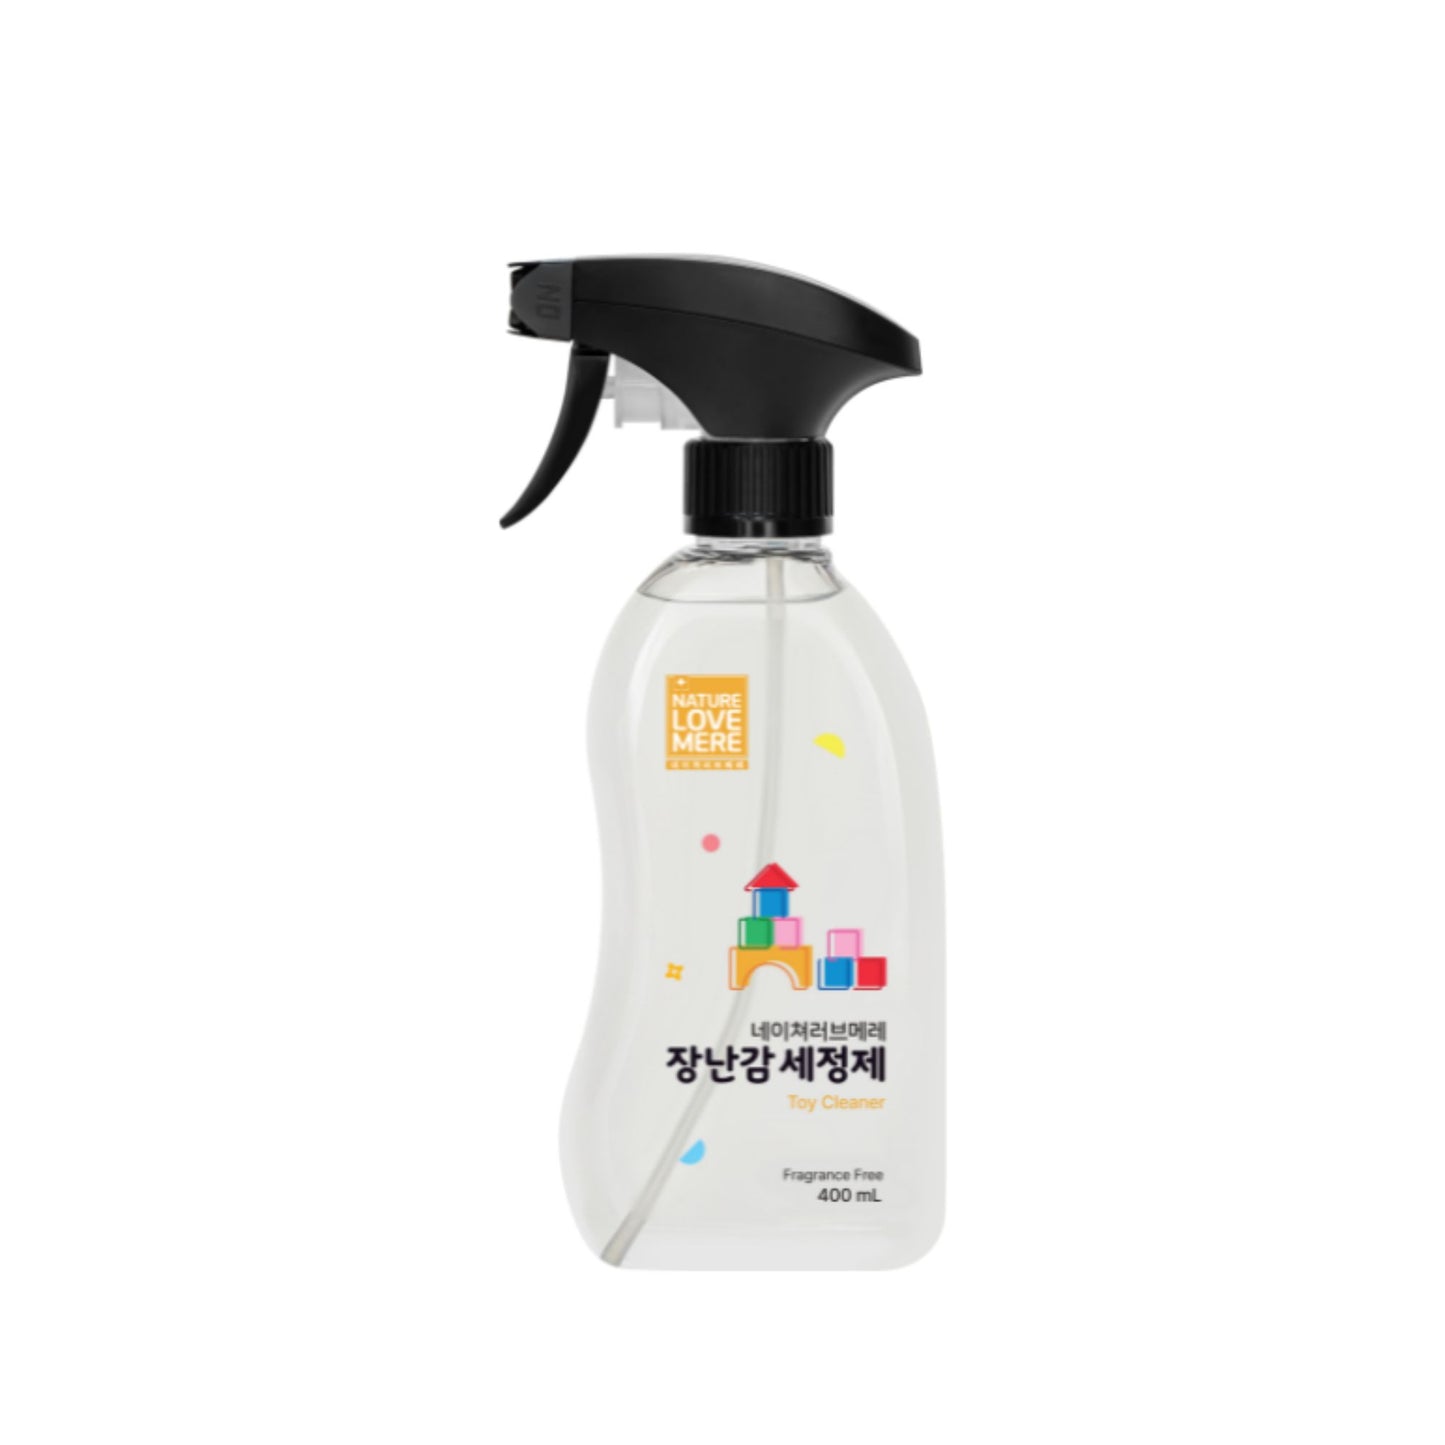 Nature Love Mere Toy Cleaner Spray And Laundry Stain Remover